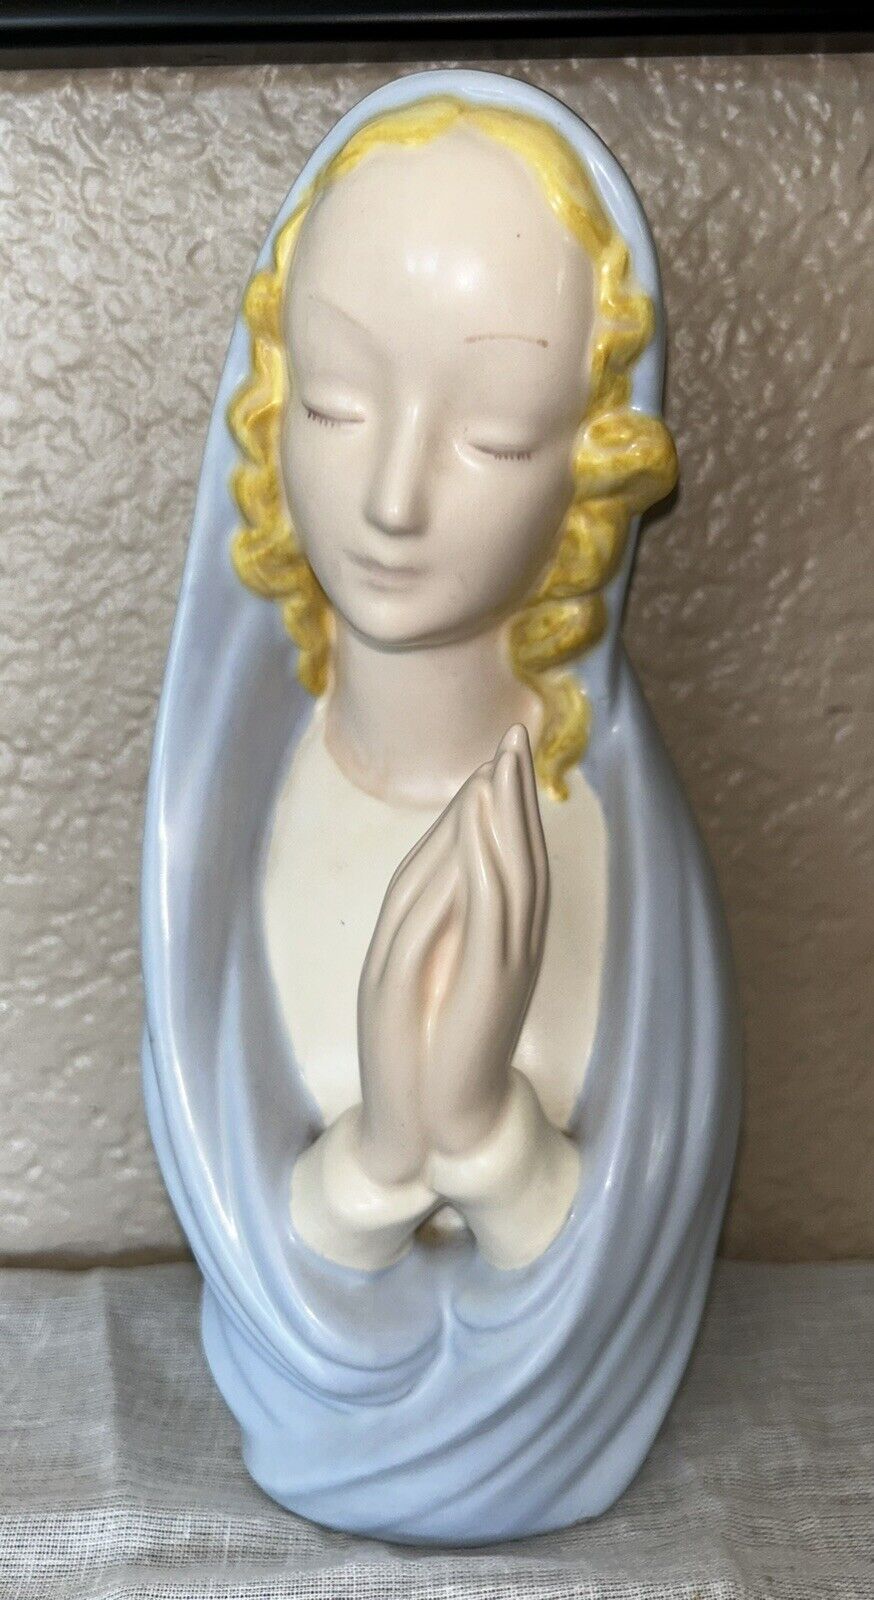 Vintage Praying Virgin Mother Mary Hand Painted Ceramic Holy Madonna Figure 9.5”